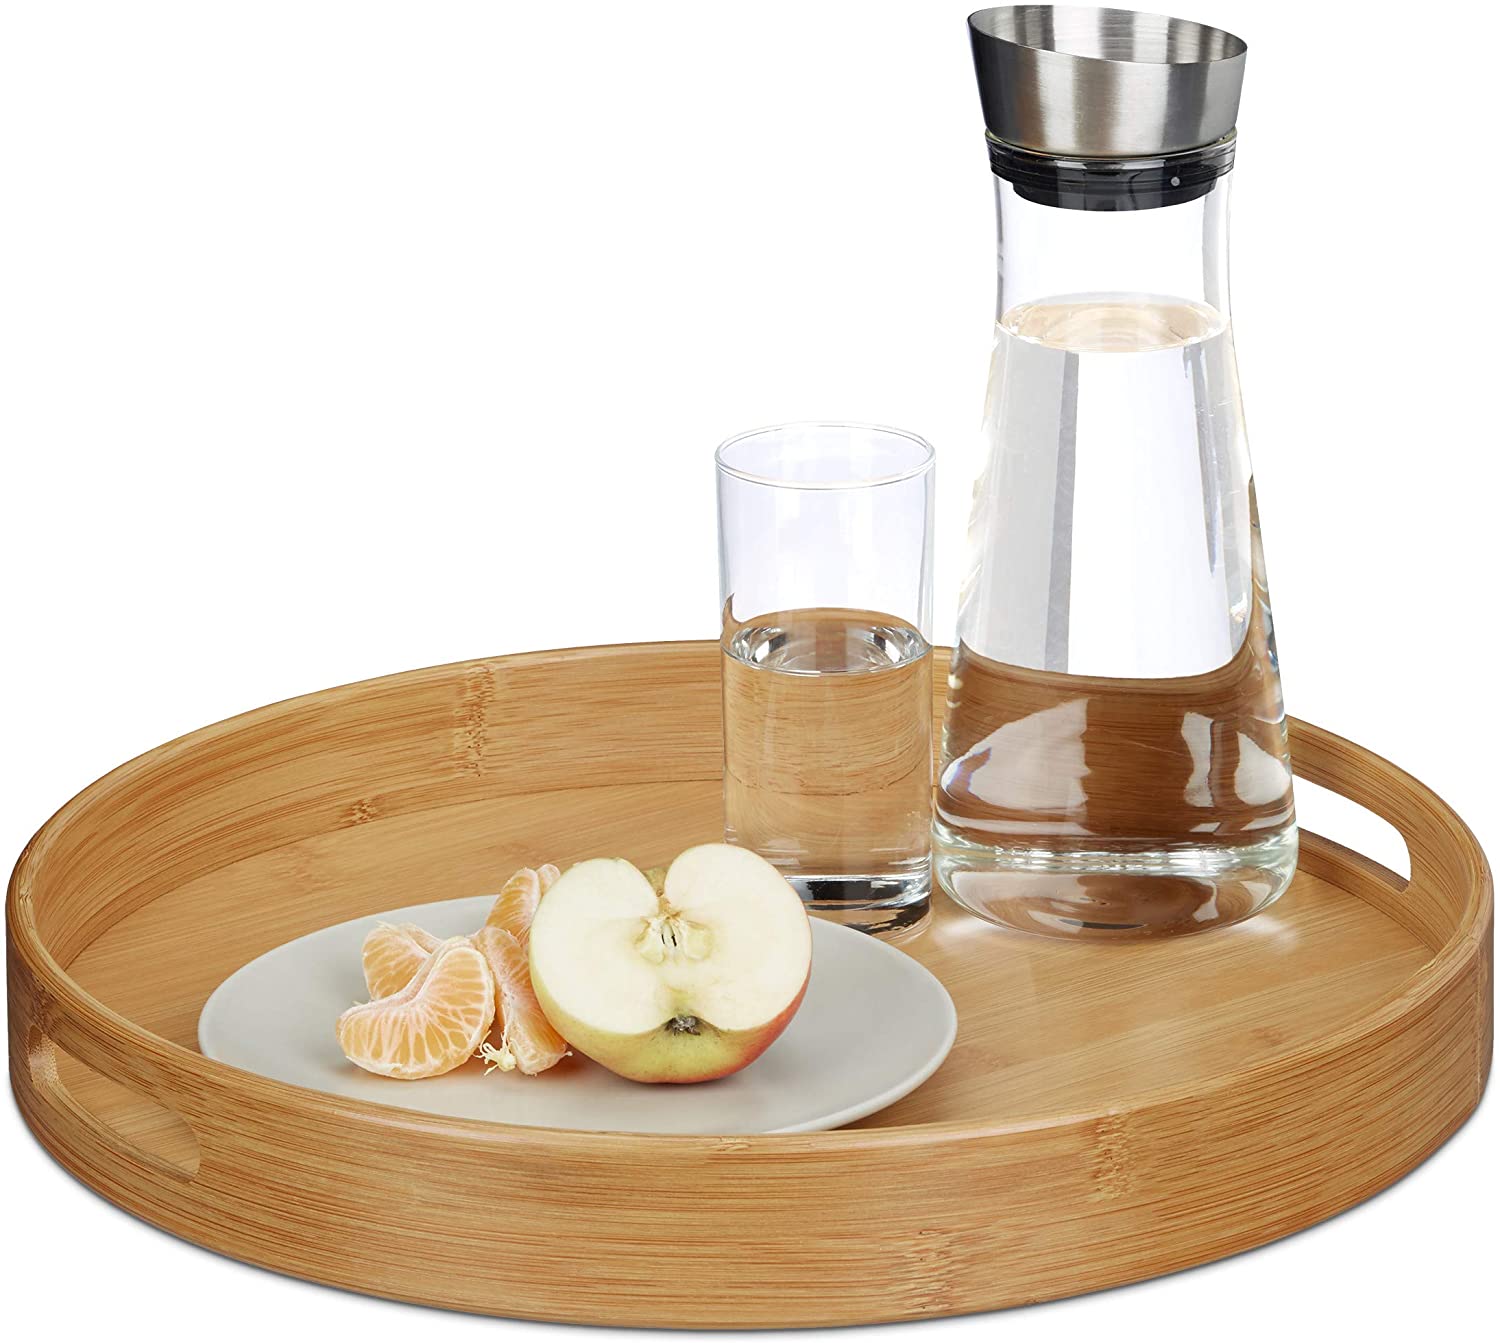 Relaxdays Serving tray bamboo round, raised edge, catering tray, handle holes, H x W x D: 5 x 38.5 x 38.5 cm, wood, natural